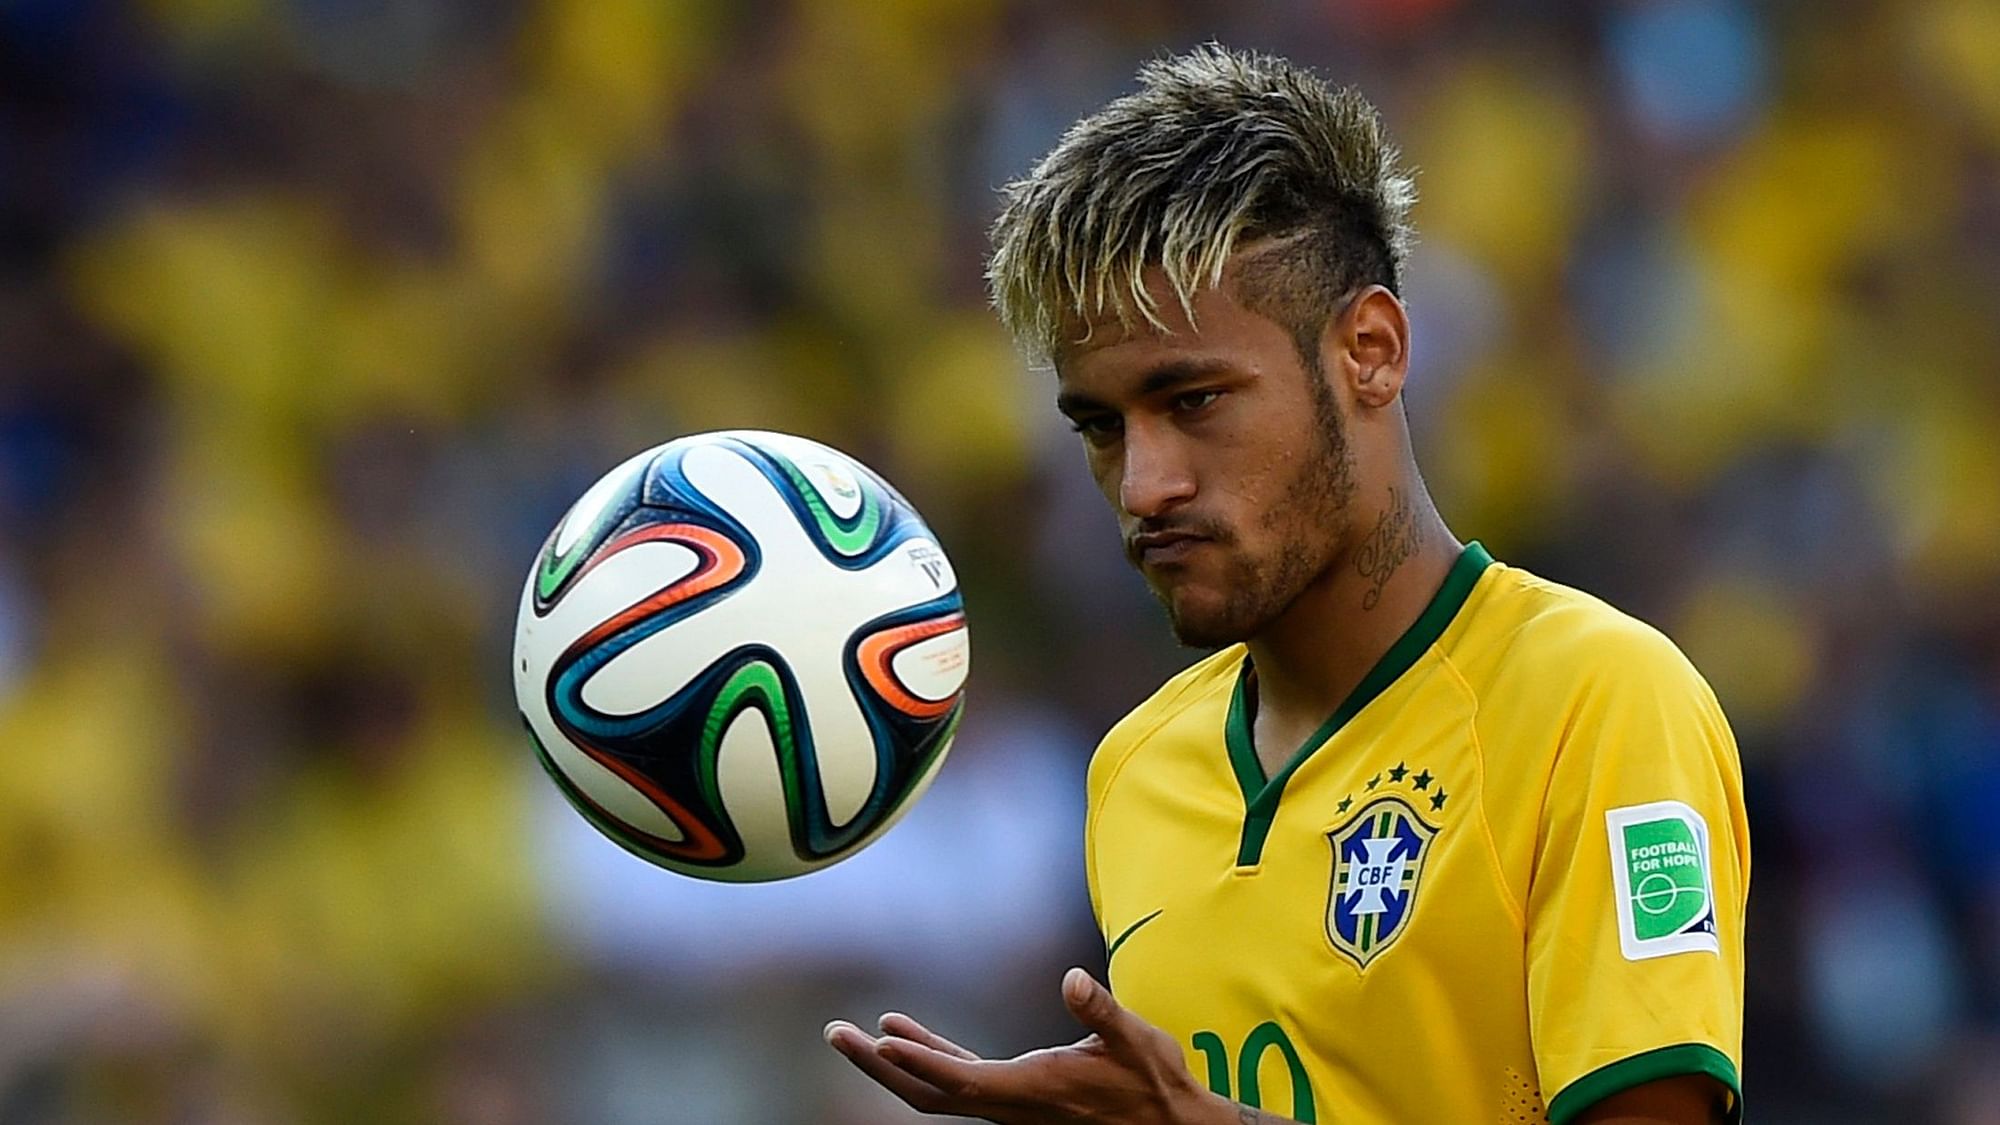 Brazilian police have found insufficient evidence to charge soccer star Neymar with rape.